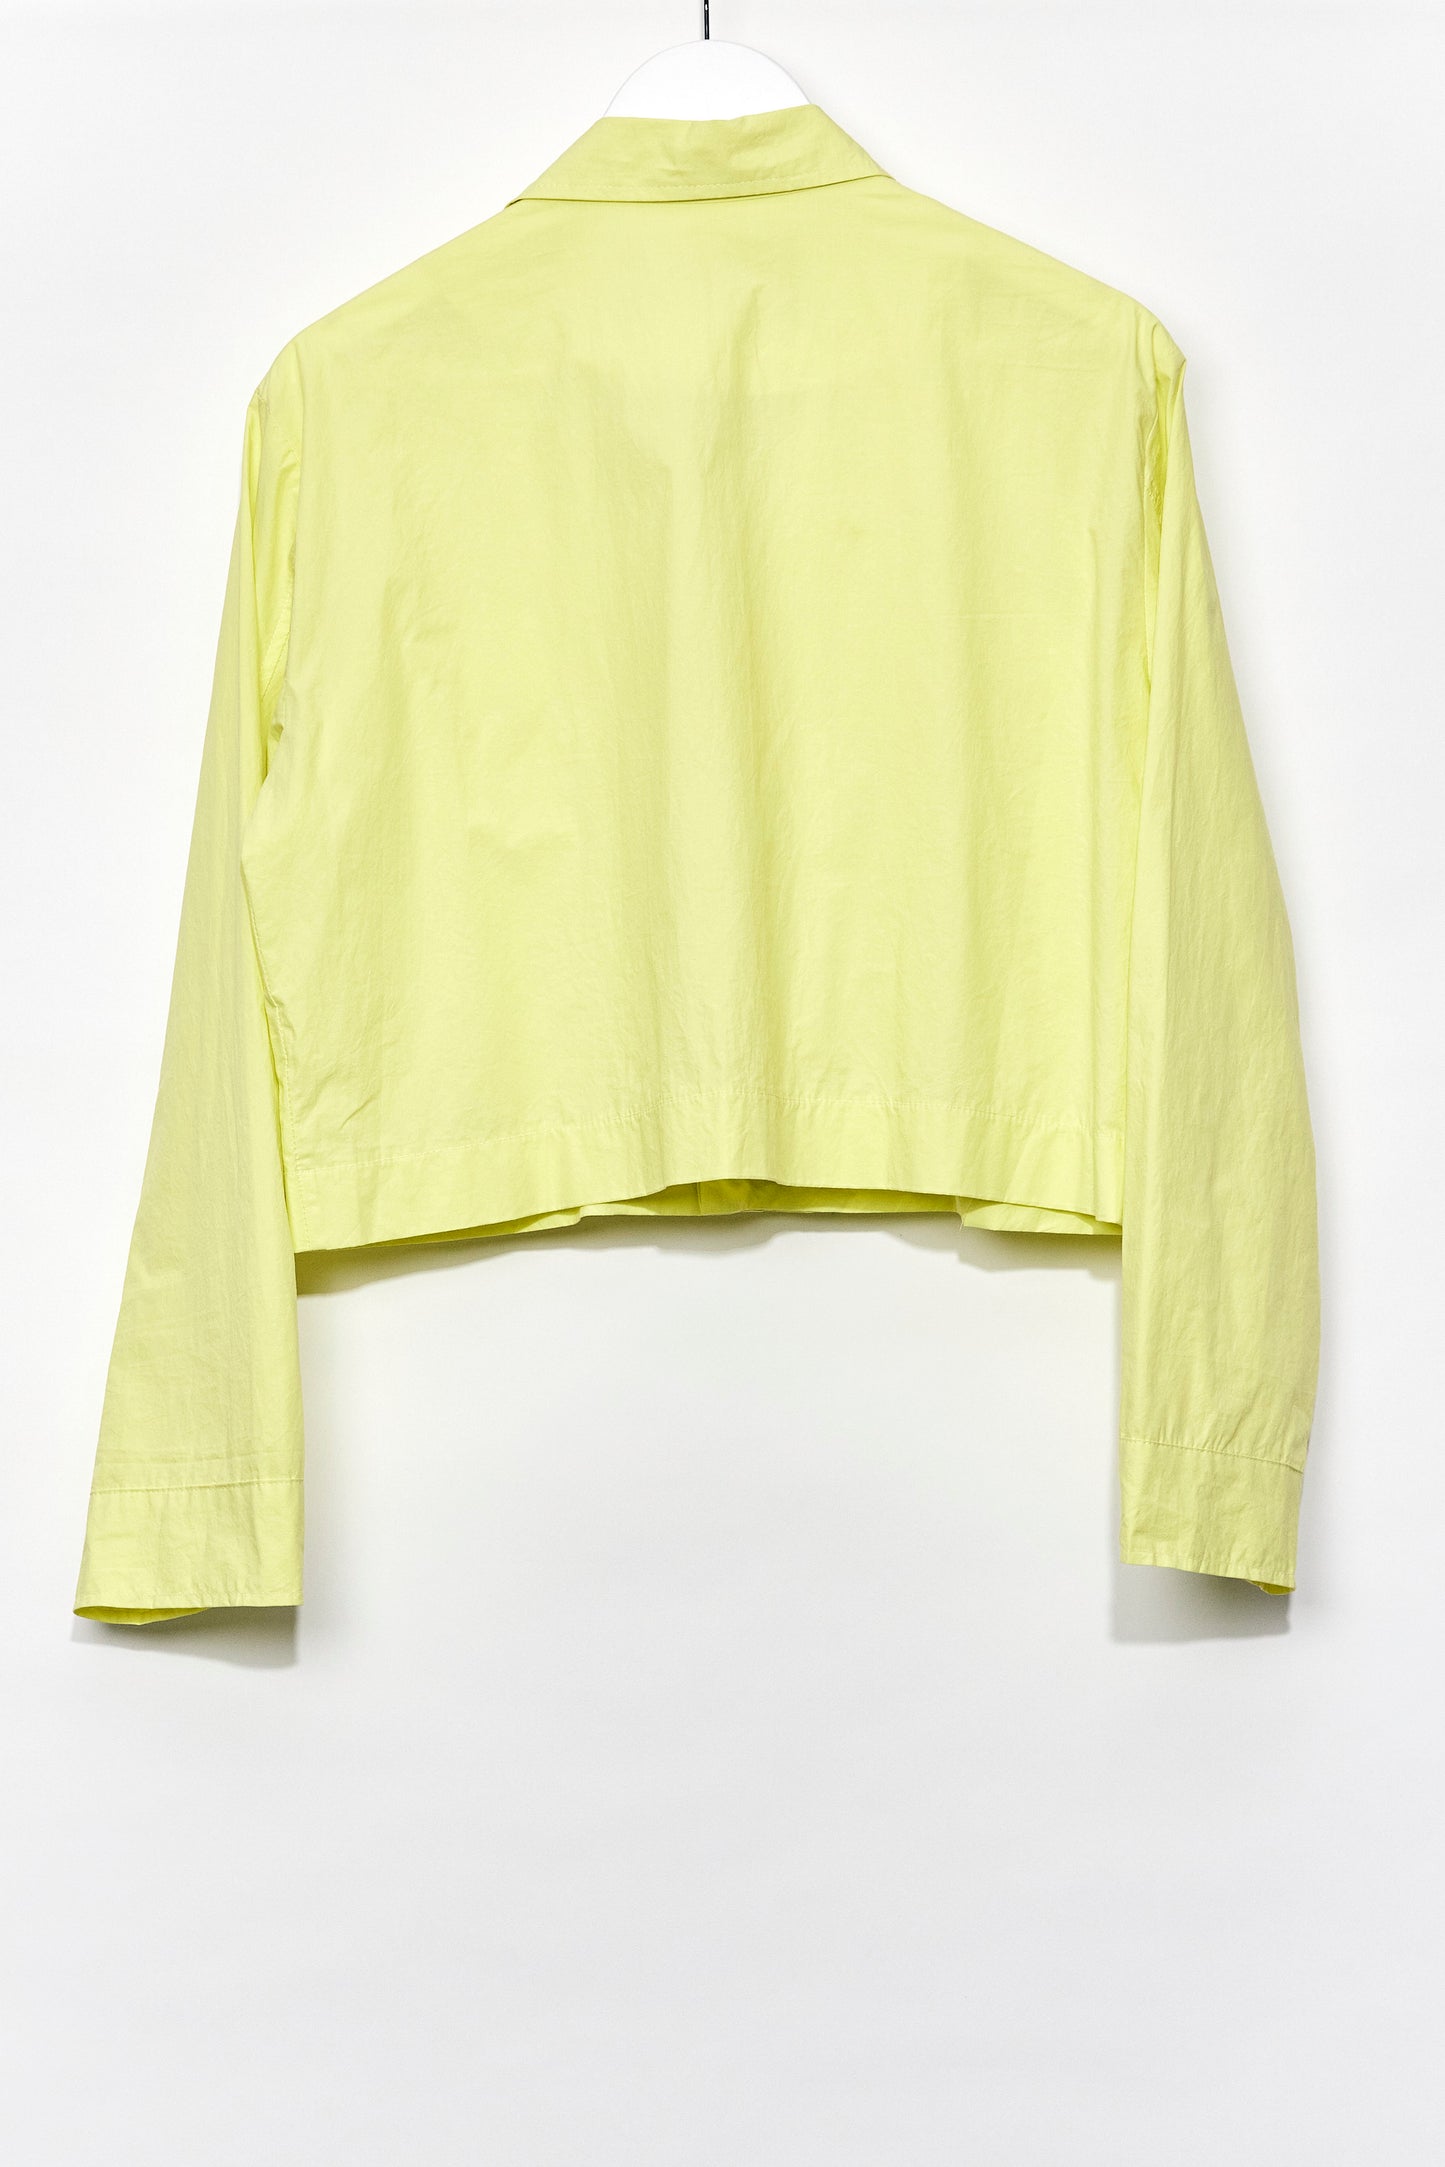 Womens Glassworks Yellow cropped utility jacket size small